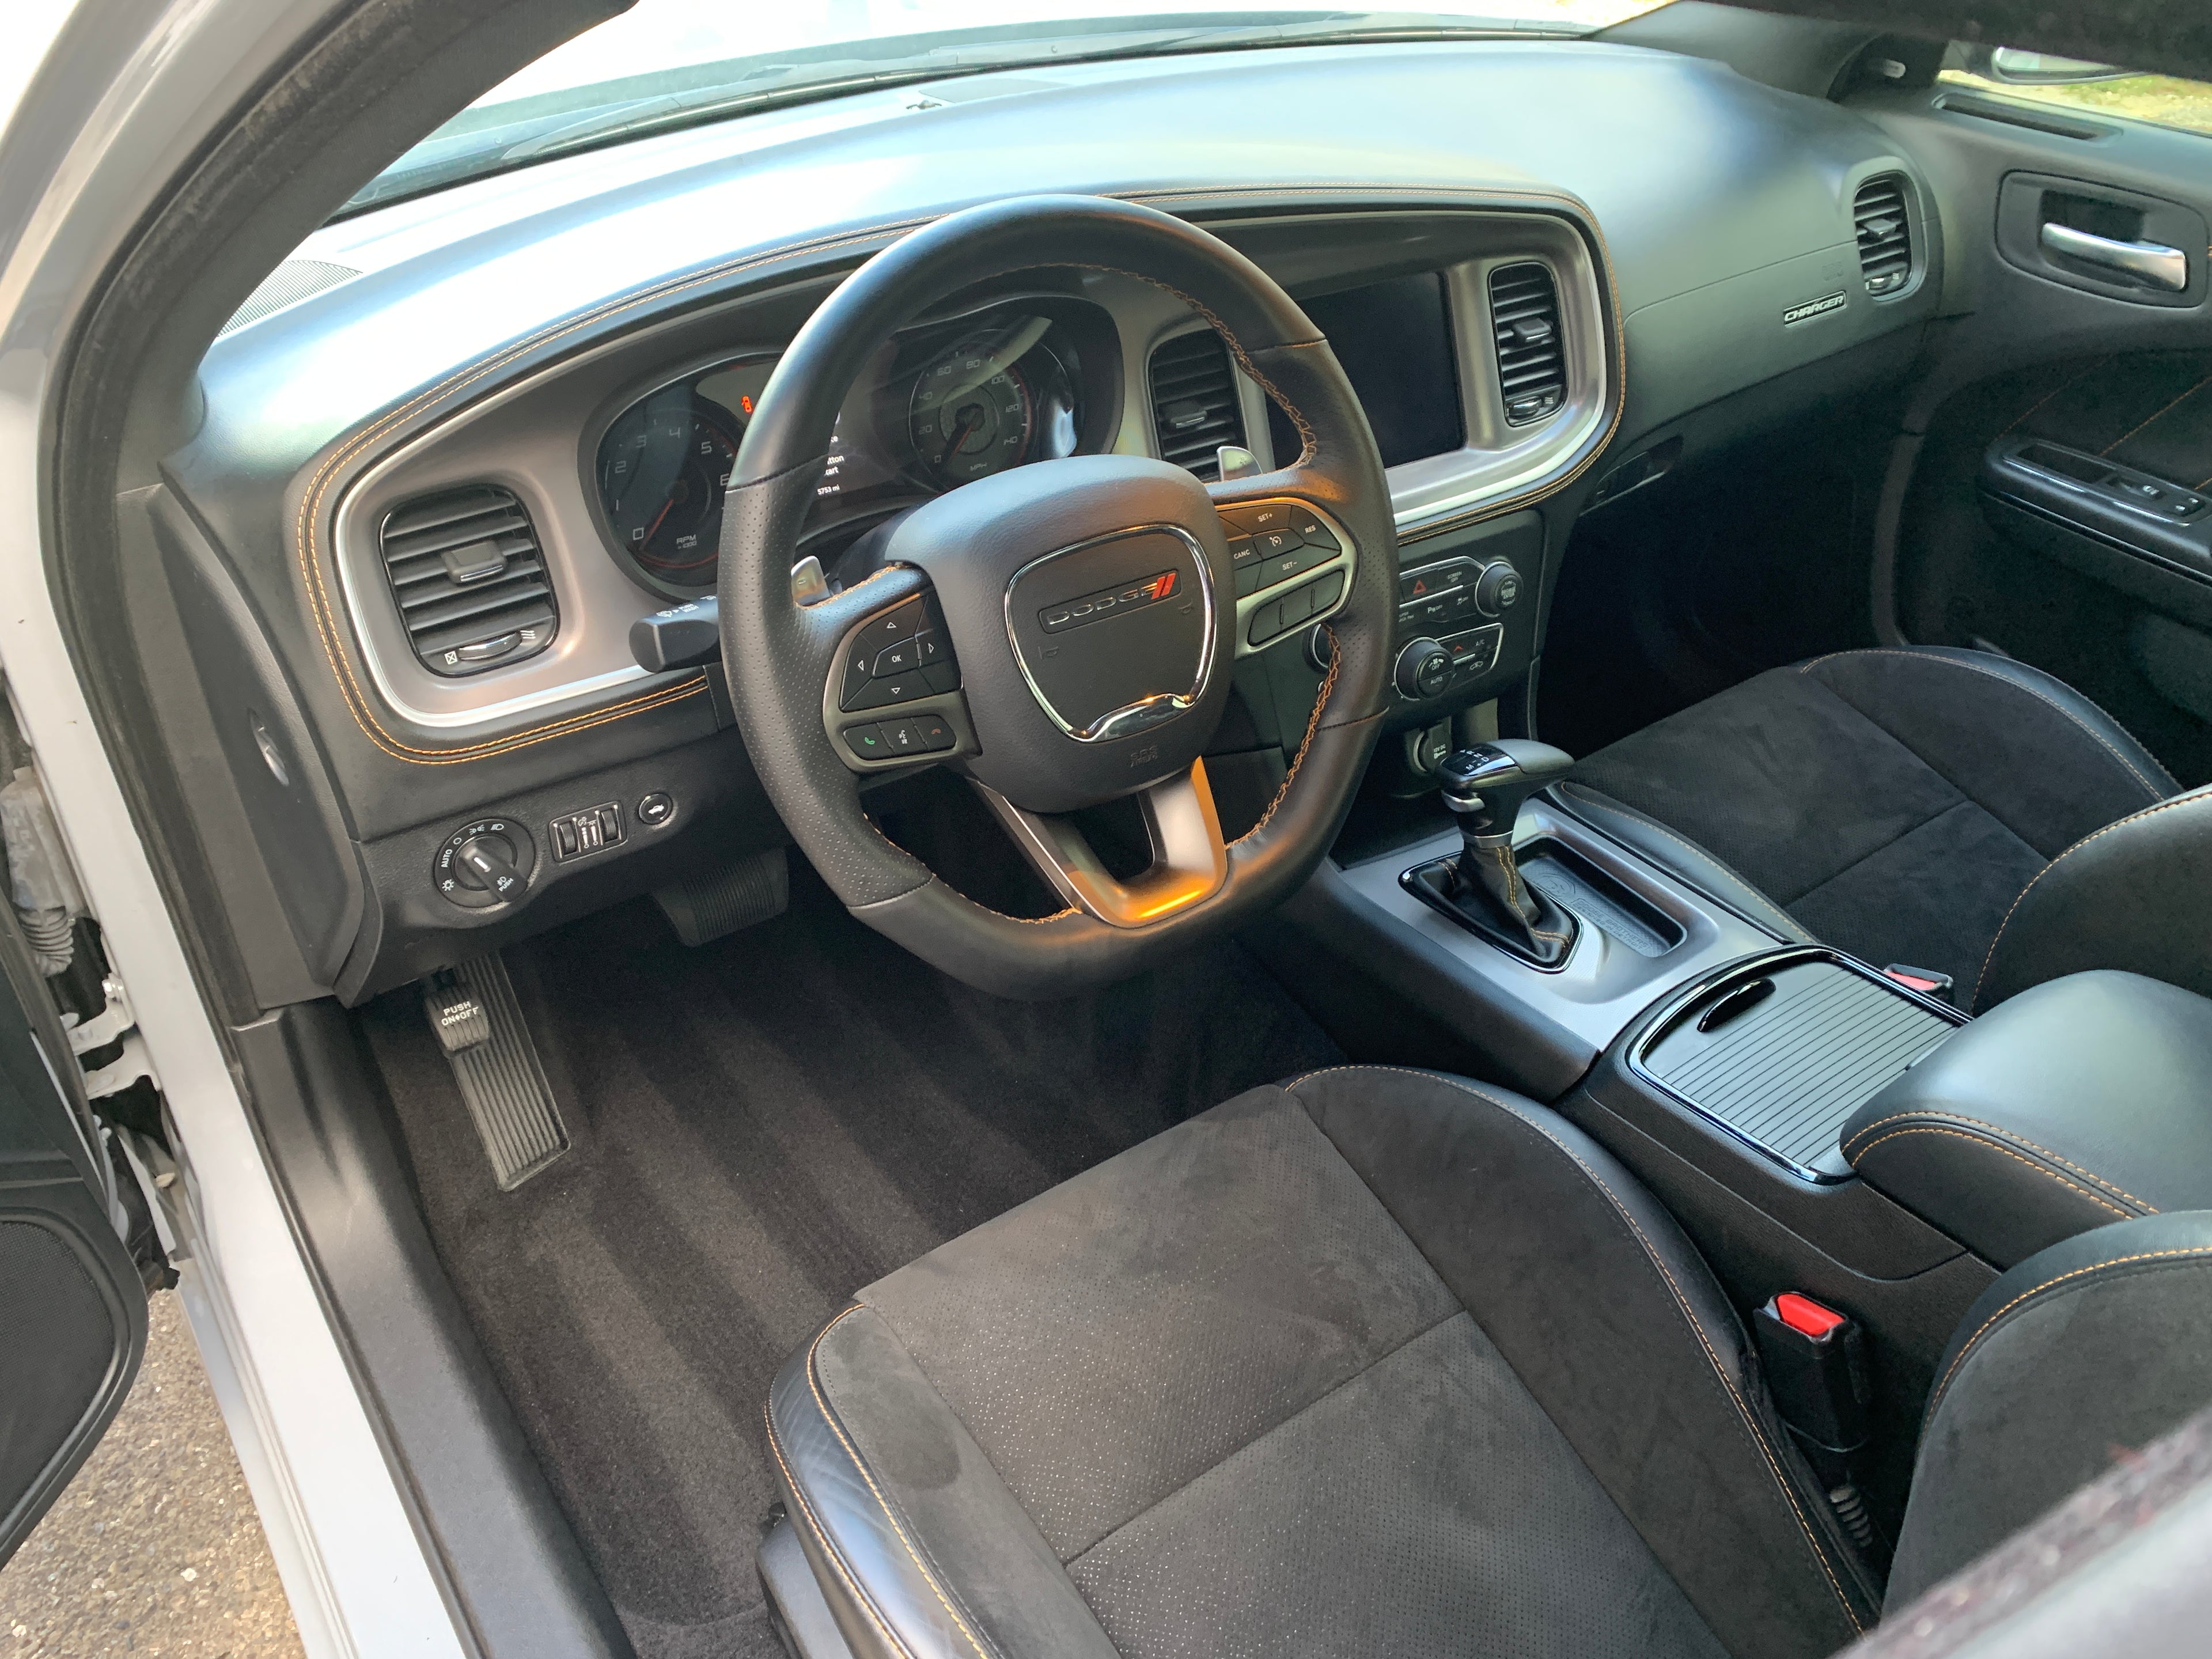 Interior of dodge charger after platinum package, professional results